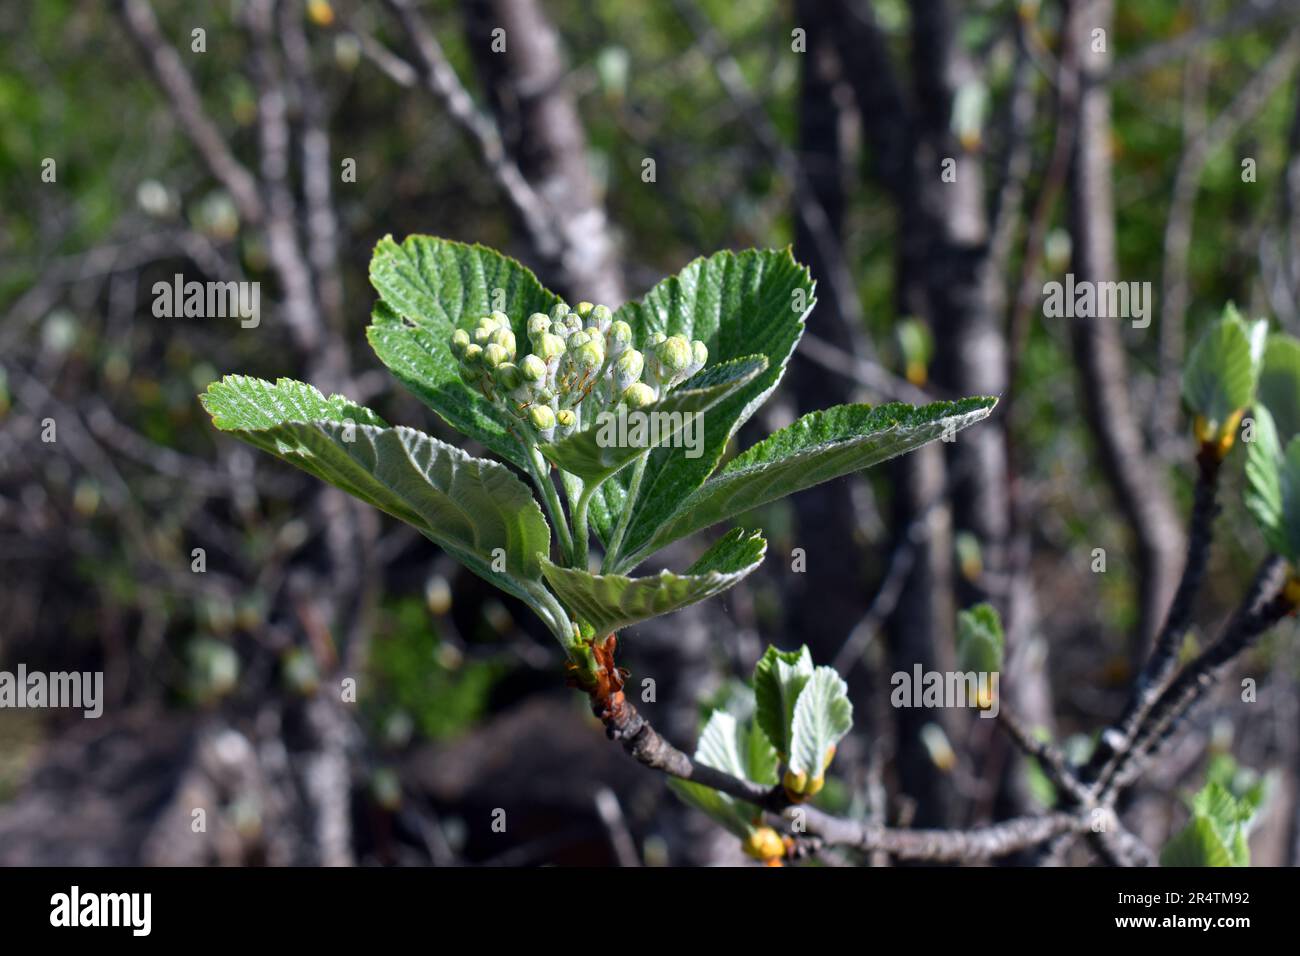 Young leaves and unopened flowers of whitebeam (Sorbus aria). Stock Photo